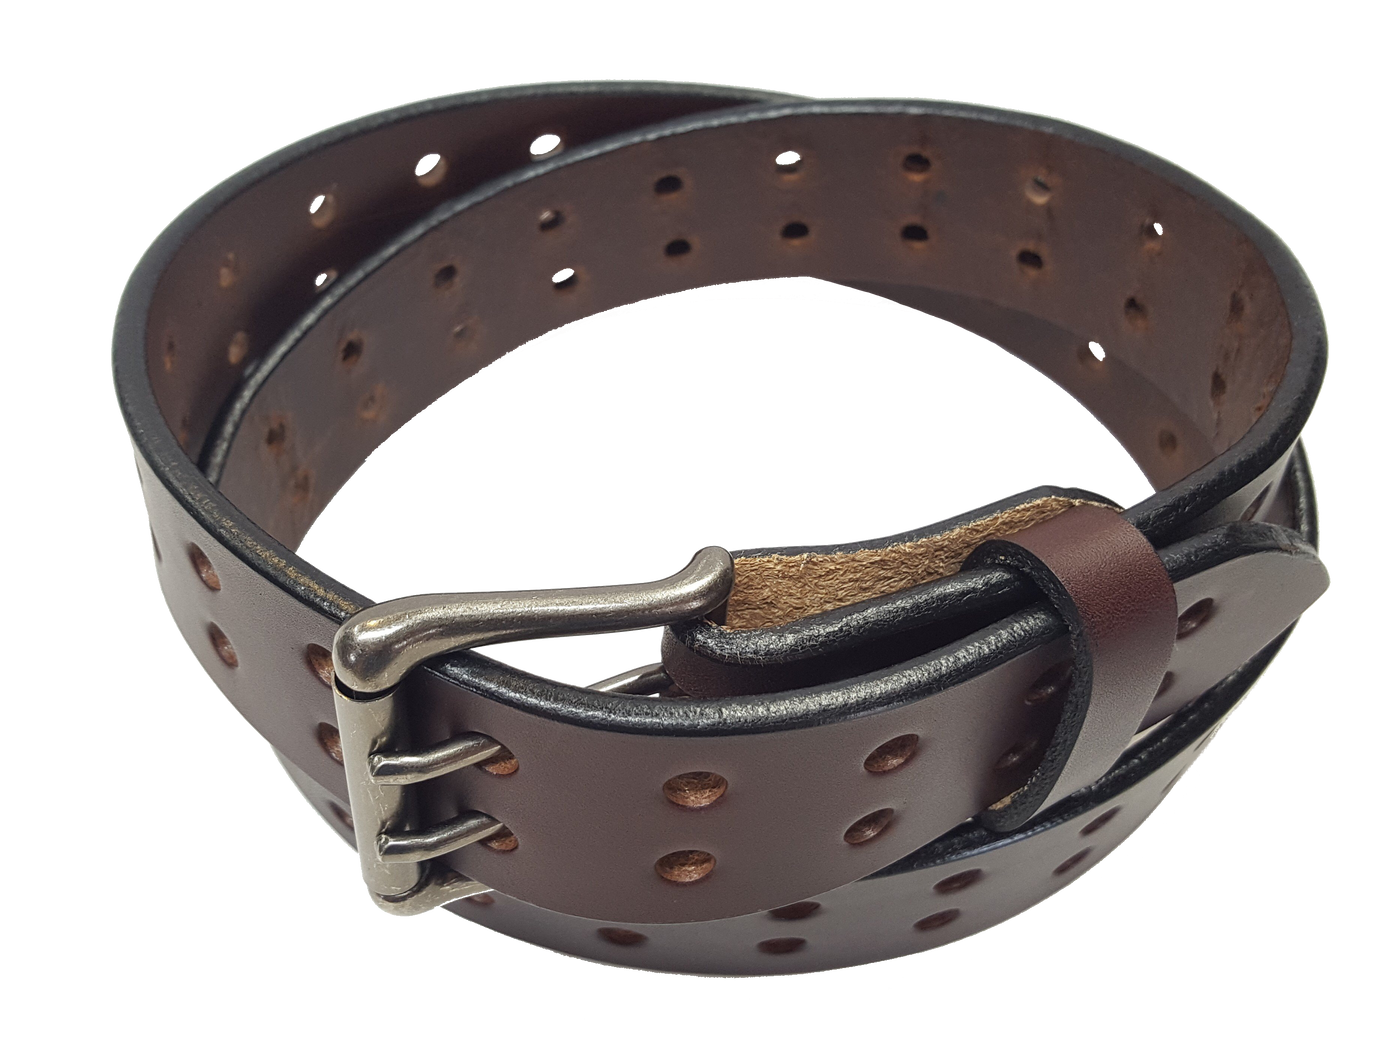 Our handmade Extra Heavy double hole leather belt is made from 12-14 oz. (approx 1/4" thick) bridle cowhide leather that is drum dyed all the way through. The double holes run the length of the belt. Buckle is a heavy double pronged roller buckle with antique nickel plated finish that is snapped in place on the end.  The width is 1 3/4", edges are smoothed and painted.  Made just outside Nashville in Smyrna, TN.  Available in black or brown.